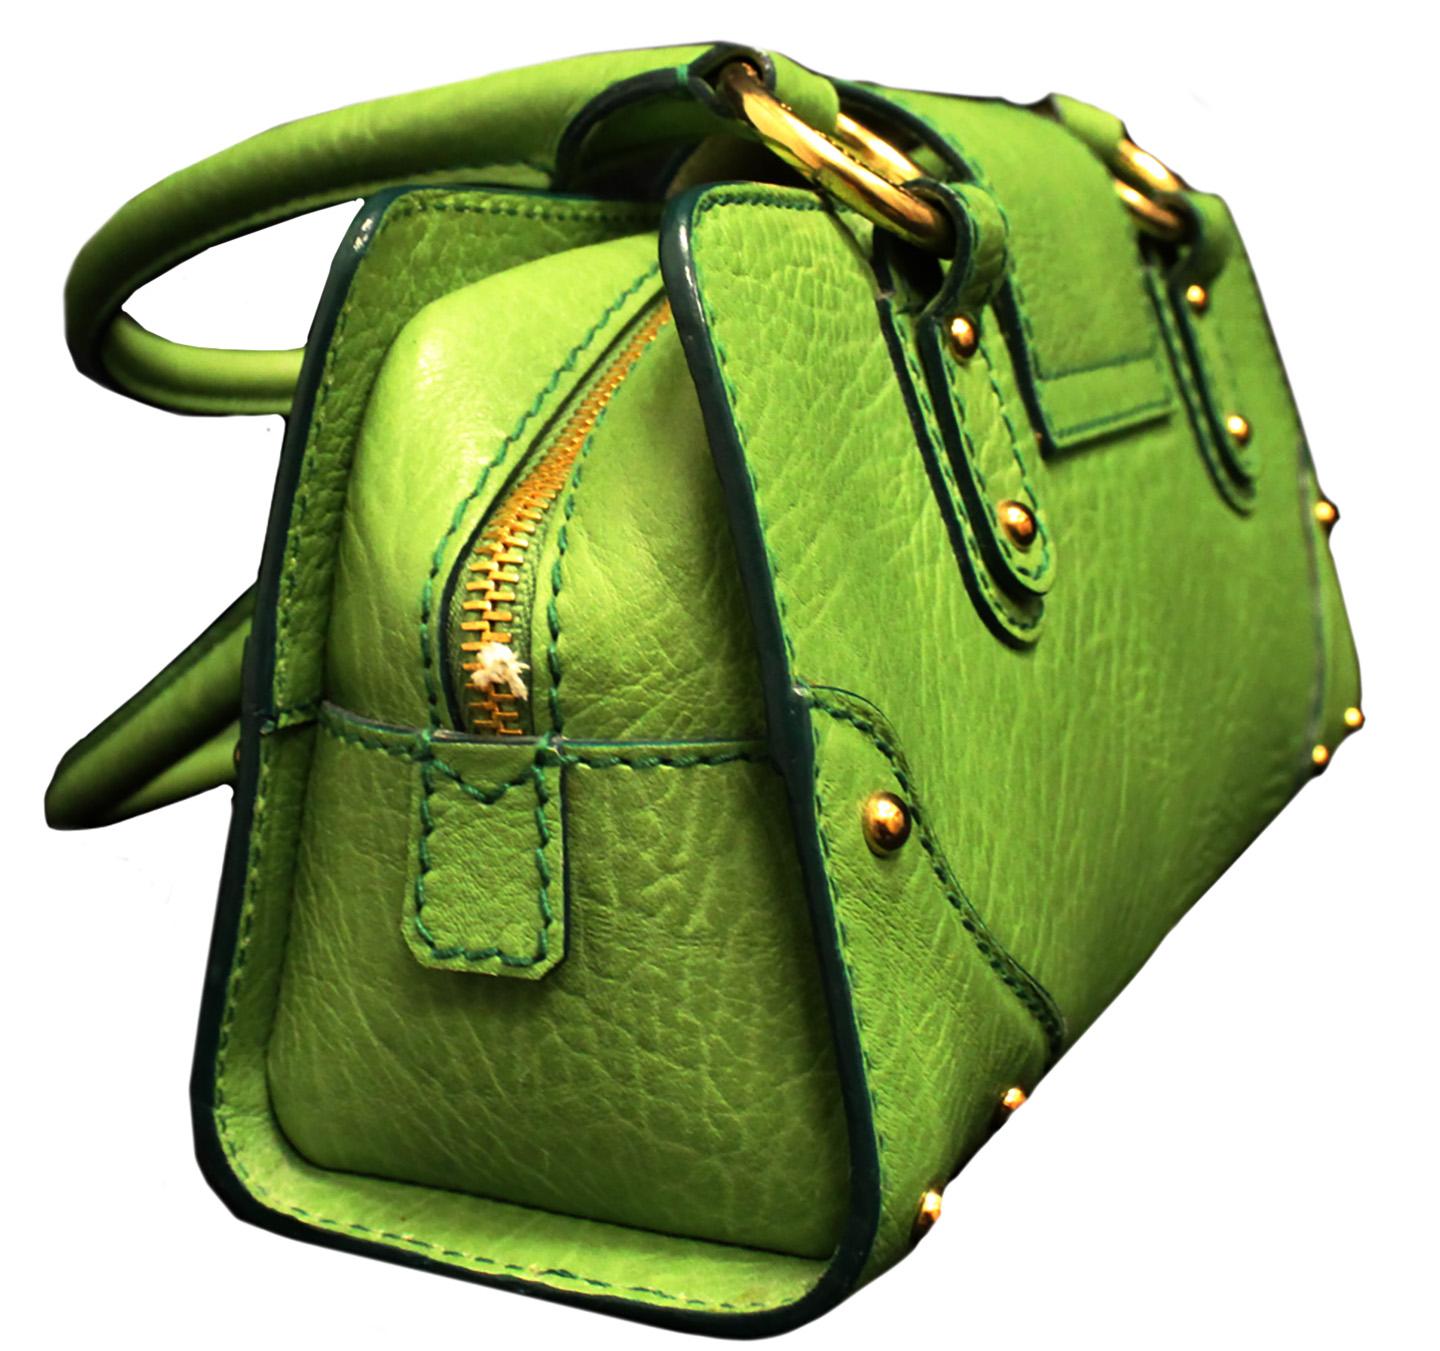 Dolce & Gabbana green grain leather bag includes two top handles with 7 inch drop that accommodates comfortably under your shoulder.  This bag is decorated with green top stitches throughout emphasizing the corner protectors, rolled leather top